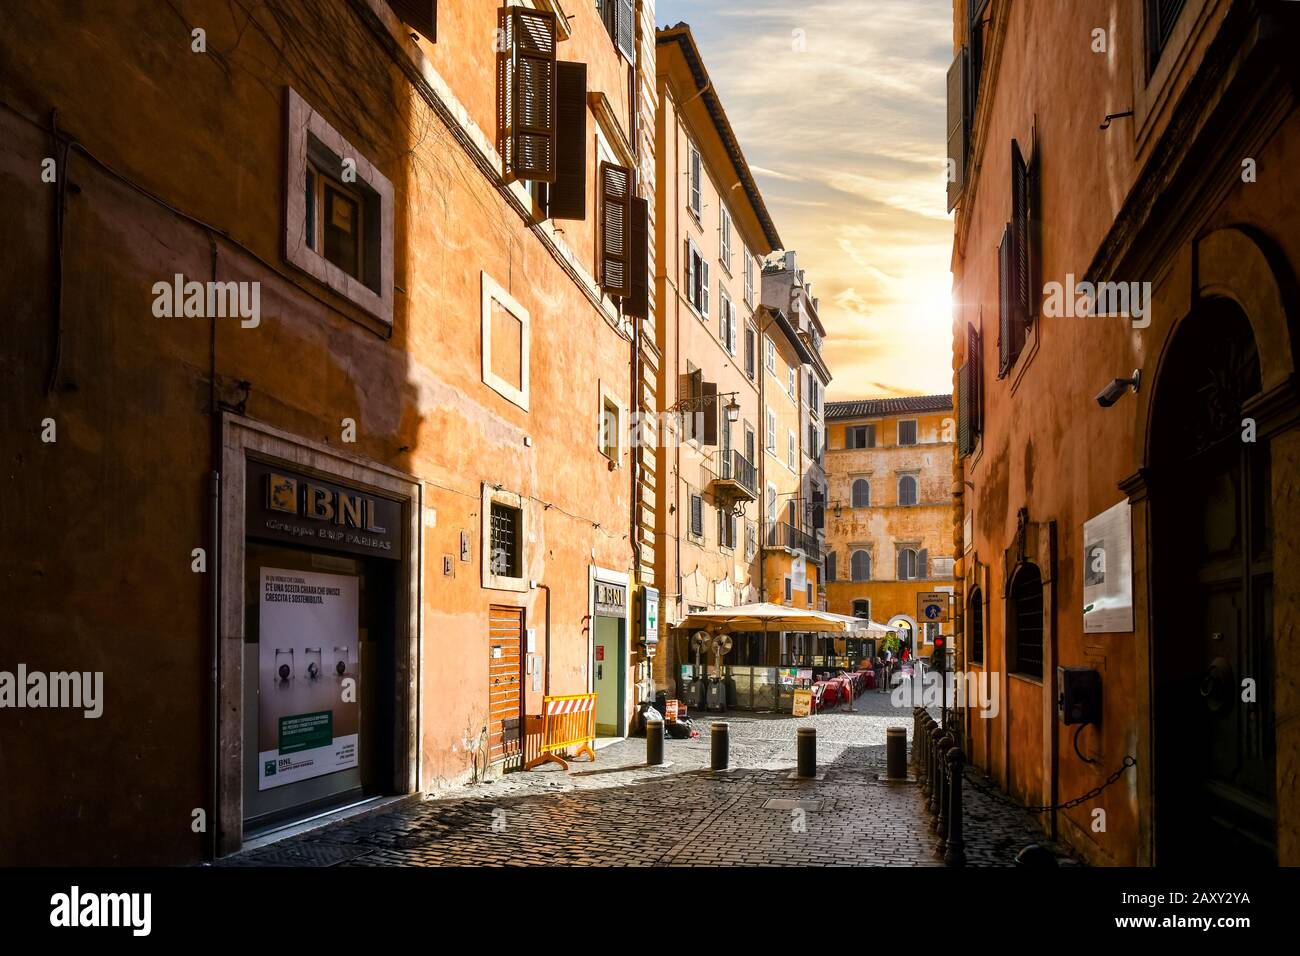 A narrow alley with high walls on either side leads to a small square with a sidewalk cafe as the sun sets in Rome, Italy. Stock Photo